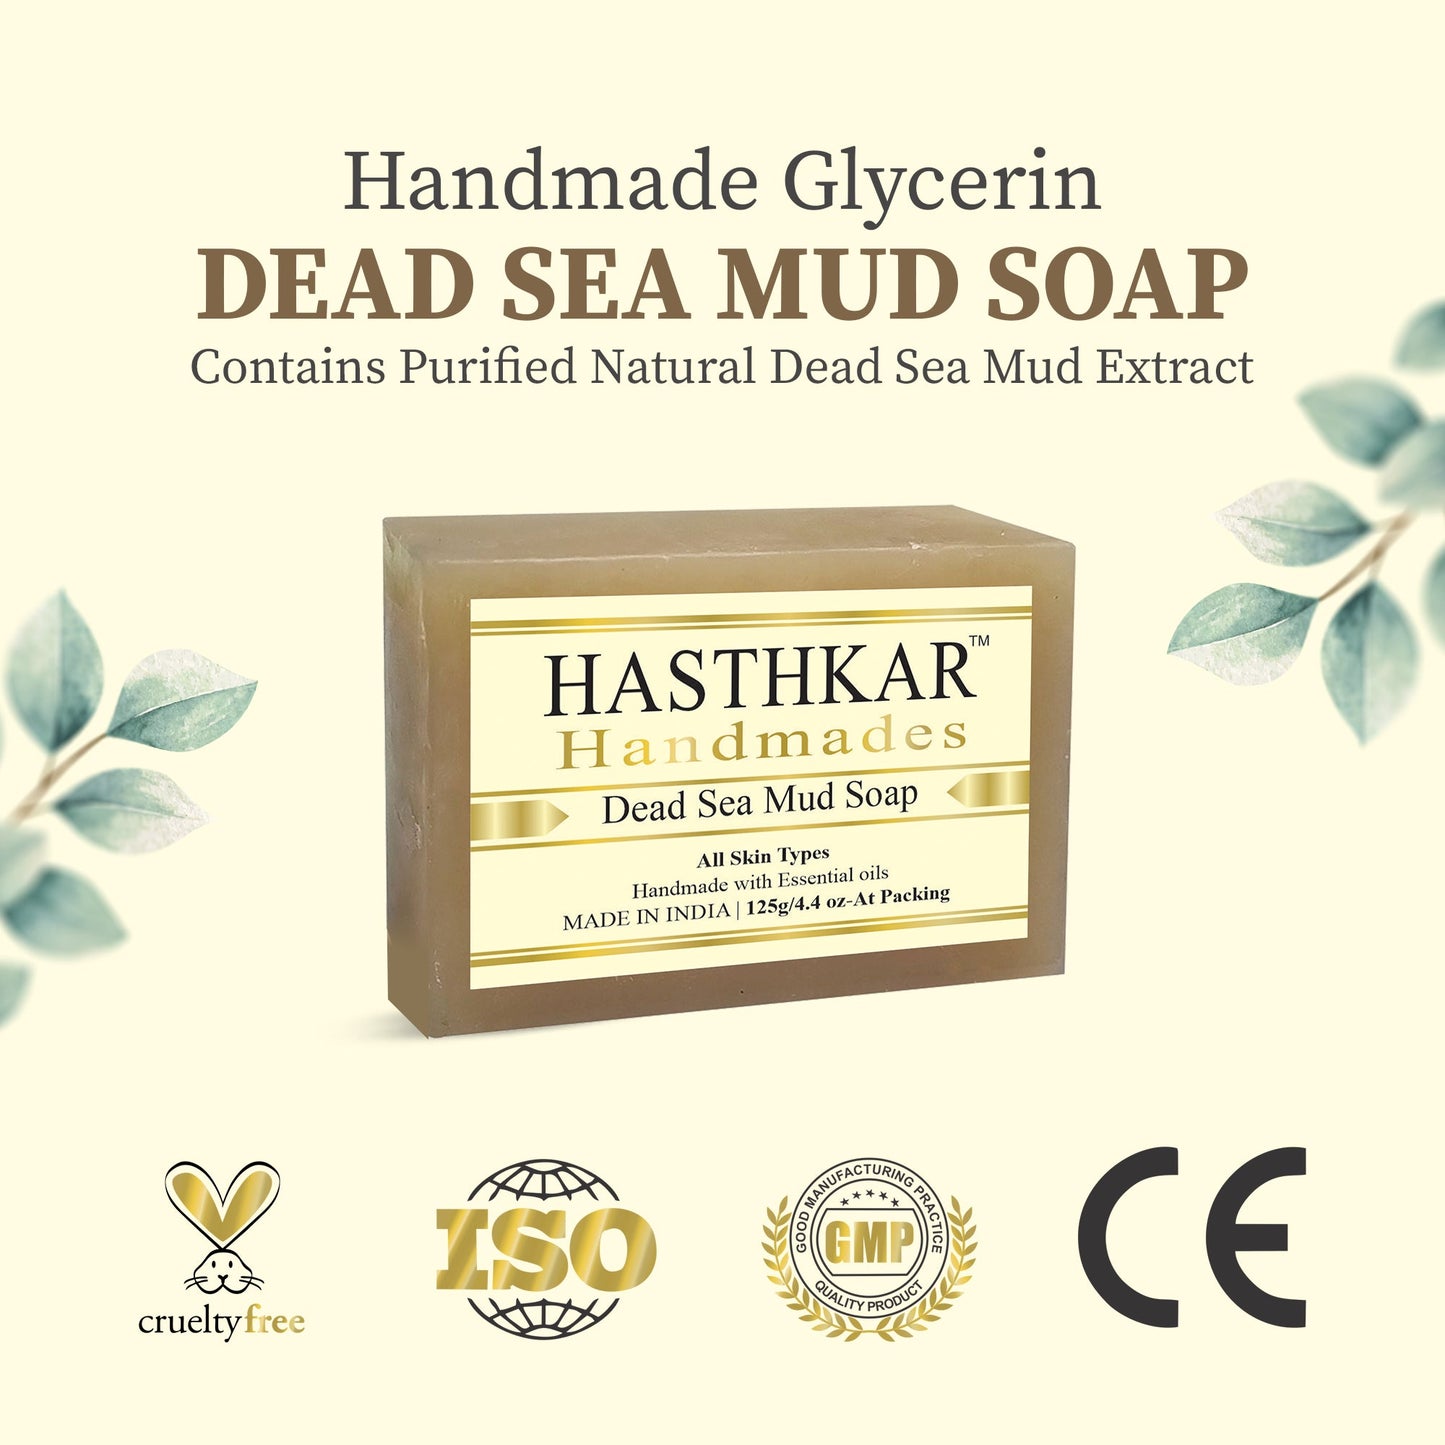 Hasthkar Handmades Glycerine Dead Sea Mud Soap For Improves Psoriasis | Reduces Skin Impurities | Provides Relief For Arthritis | Soothes Back Pain | Treats Acne | Risks And Side Effects - 125Gm